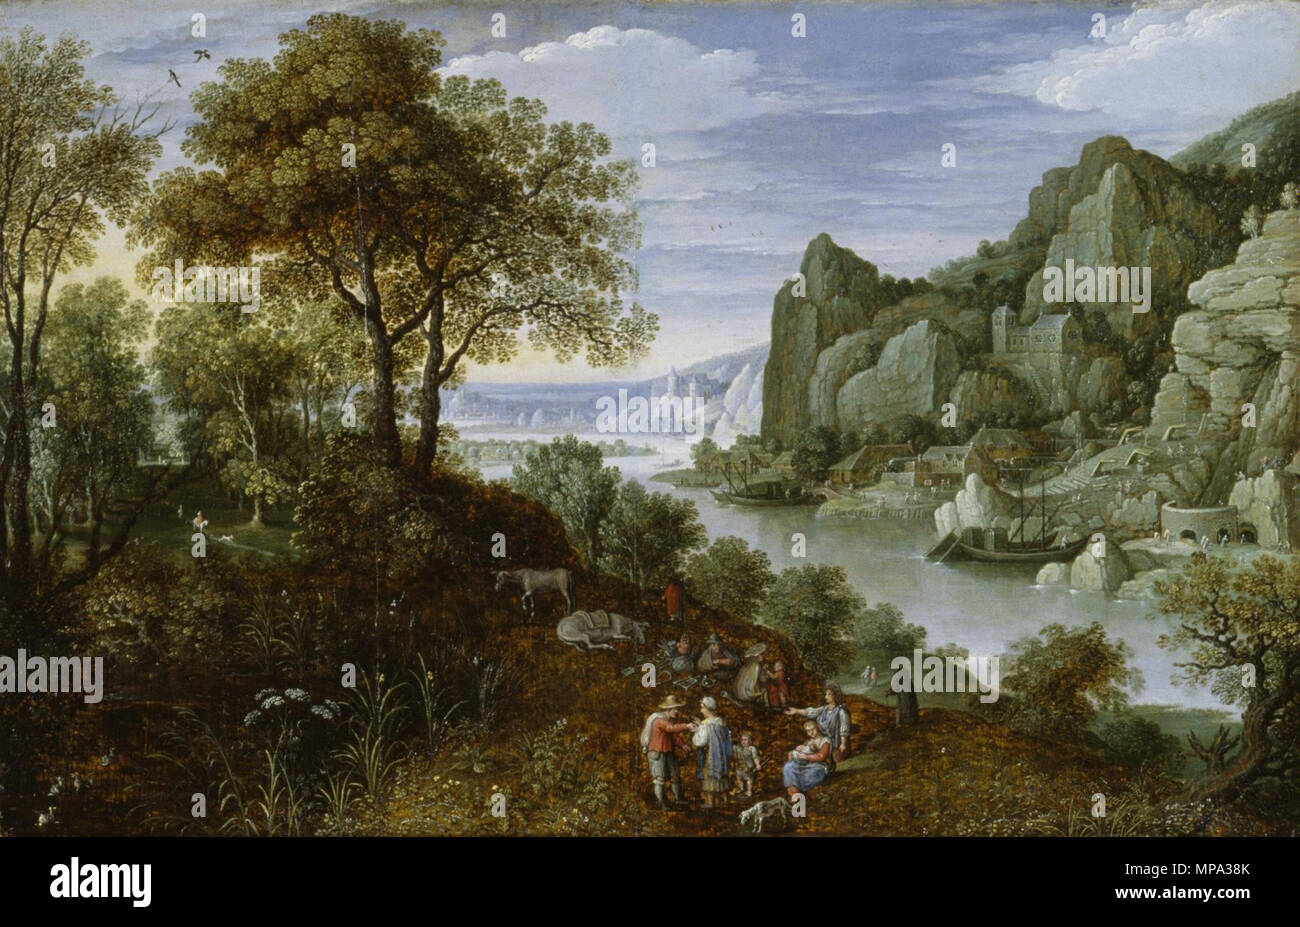 Mining Operations along a River .  English: Mining was an important industry in the Southern Netherlands, Germany and Austria. As many powerful figures with significant interests in mining were also great patrons of art, as Archduke Ferdinand of Austria, the theme became quite popular for landscape painting. The precipitous descent into the valley combined with foreground detail- gypsies selling farm tools- exemplifies the startling contrasts found in later 16th-century landscapes by Lucas van Valkenborch. However, the painting technique is that of Martin Rykaert, a 17th-century painter who de Stock Photo